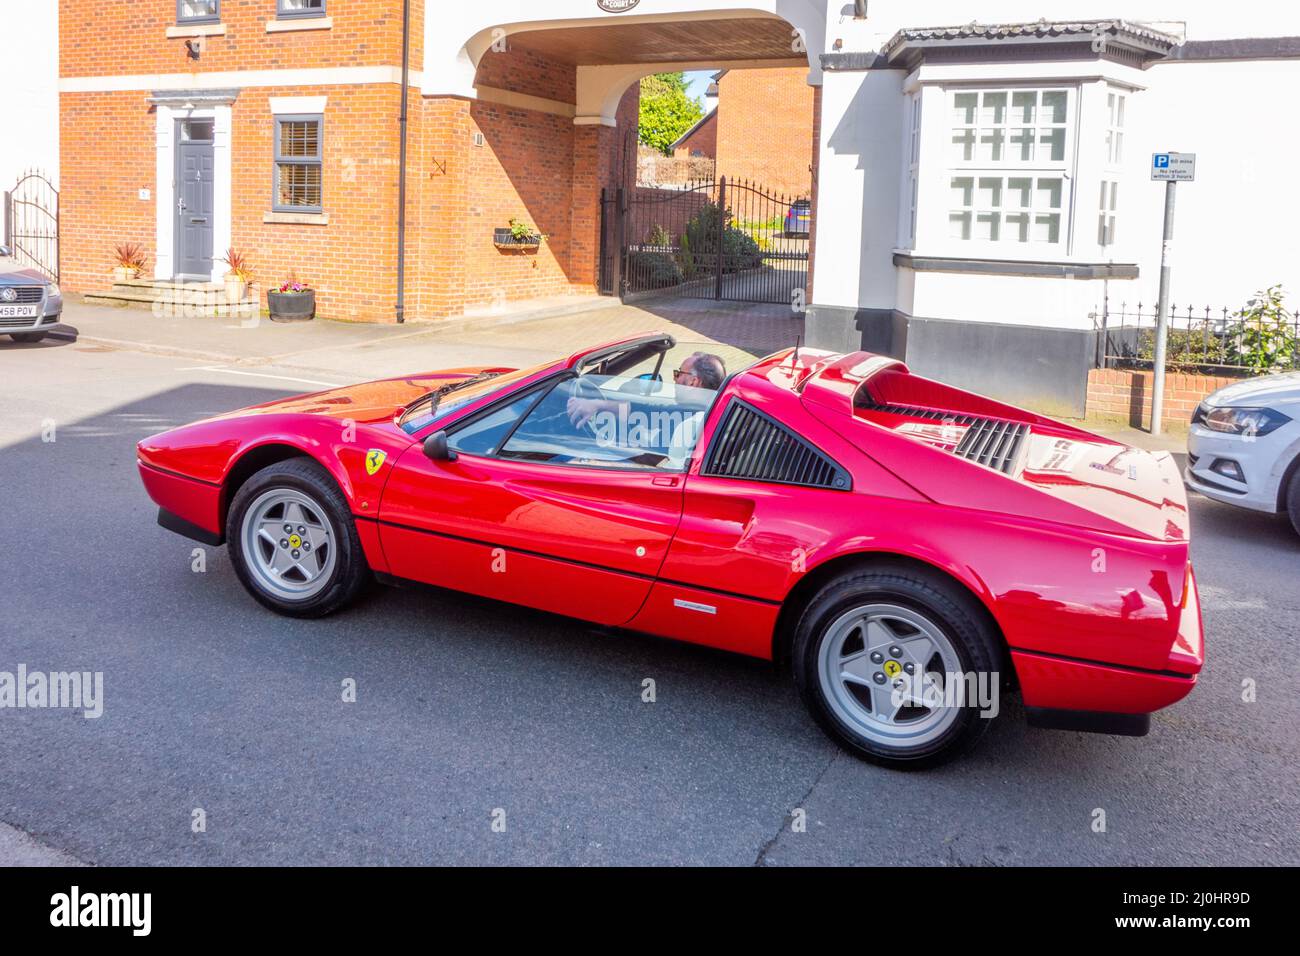 Red Ferrari car in the Cheshire village of Audlem Stock Photo